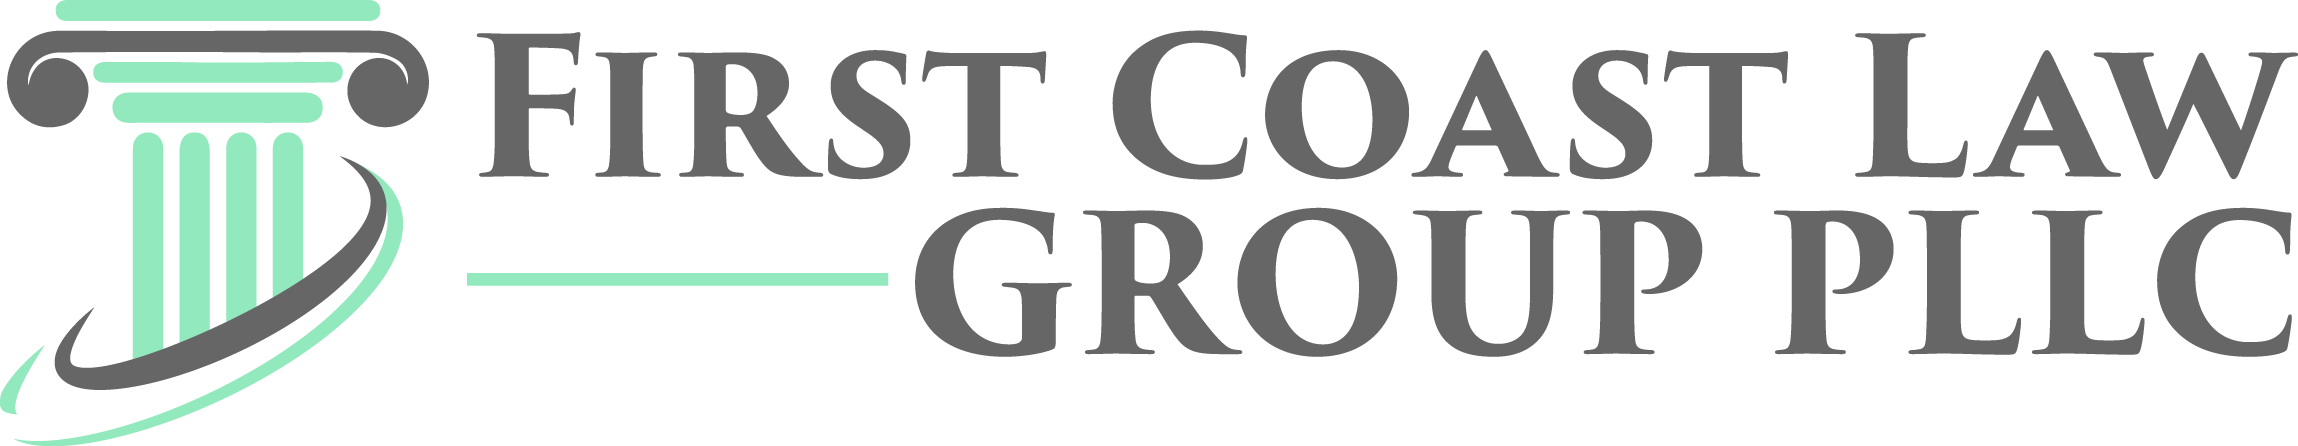 First Coast Law Group PLLC